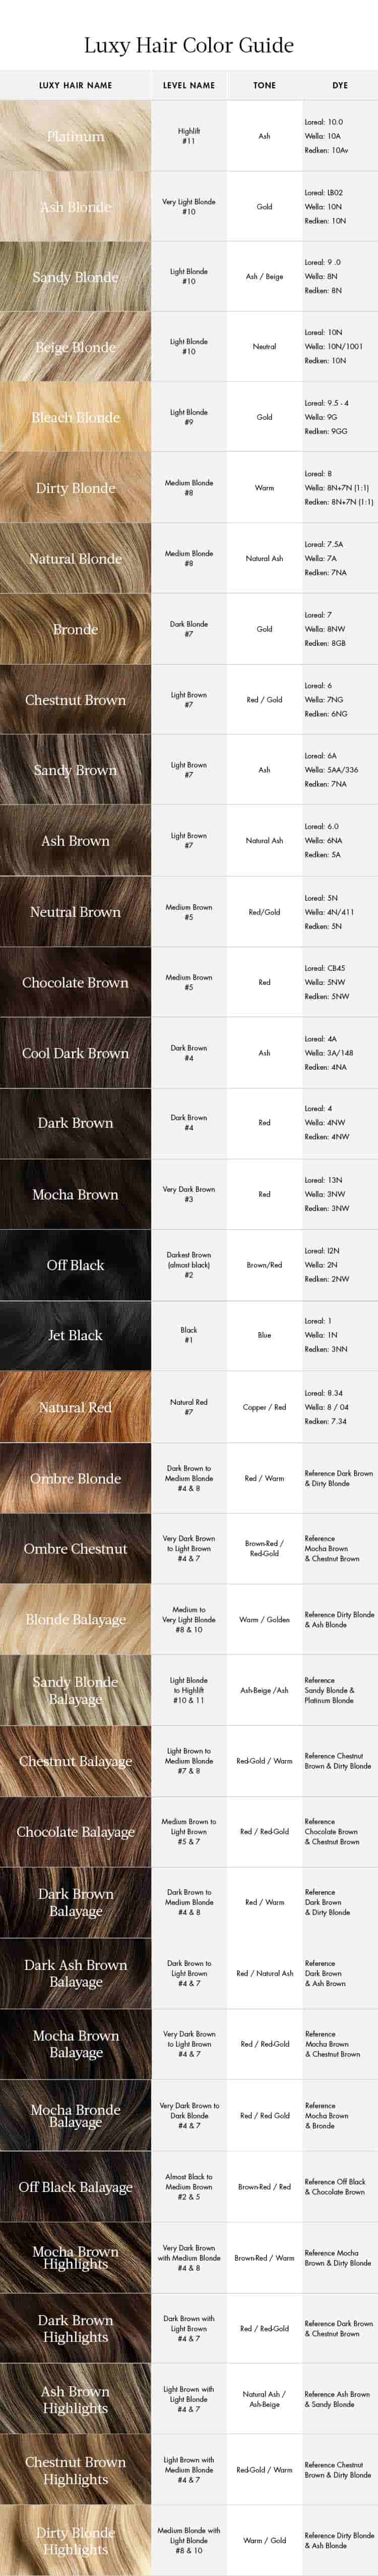 What Is The Level And Undertone Of All Of Your Extension Colors Luxy Hair Support